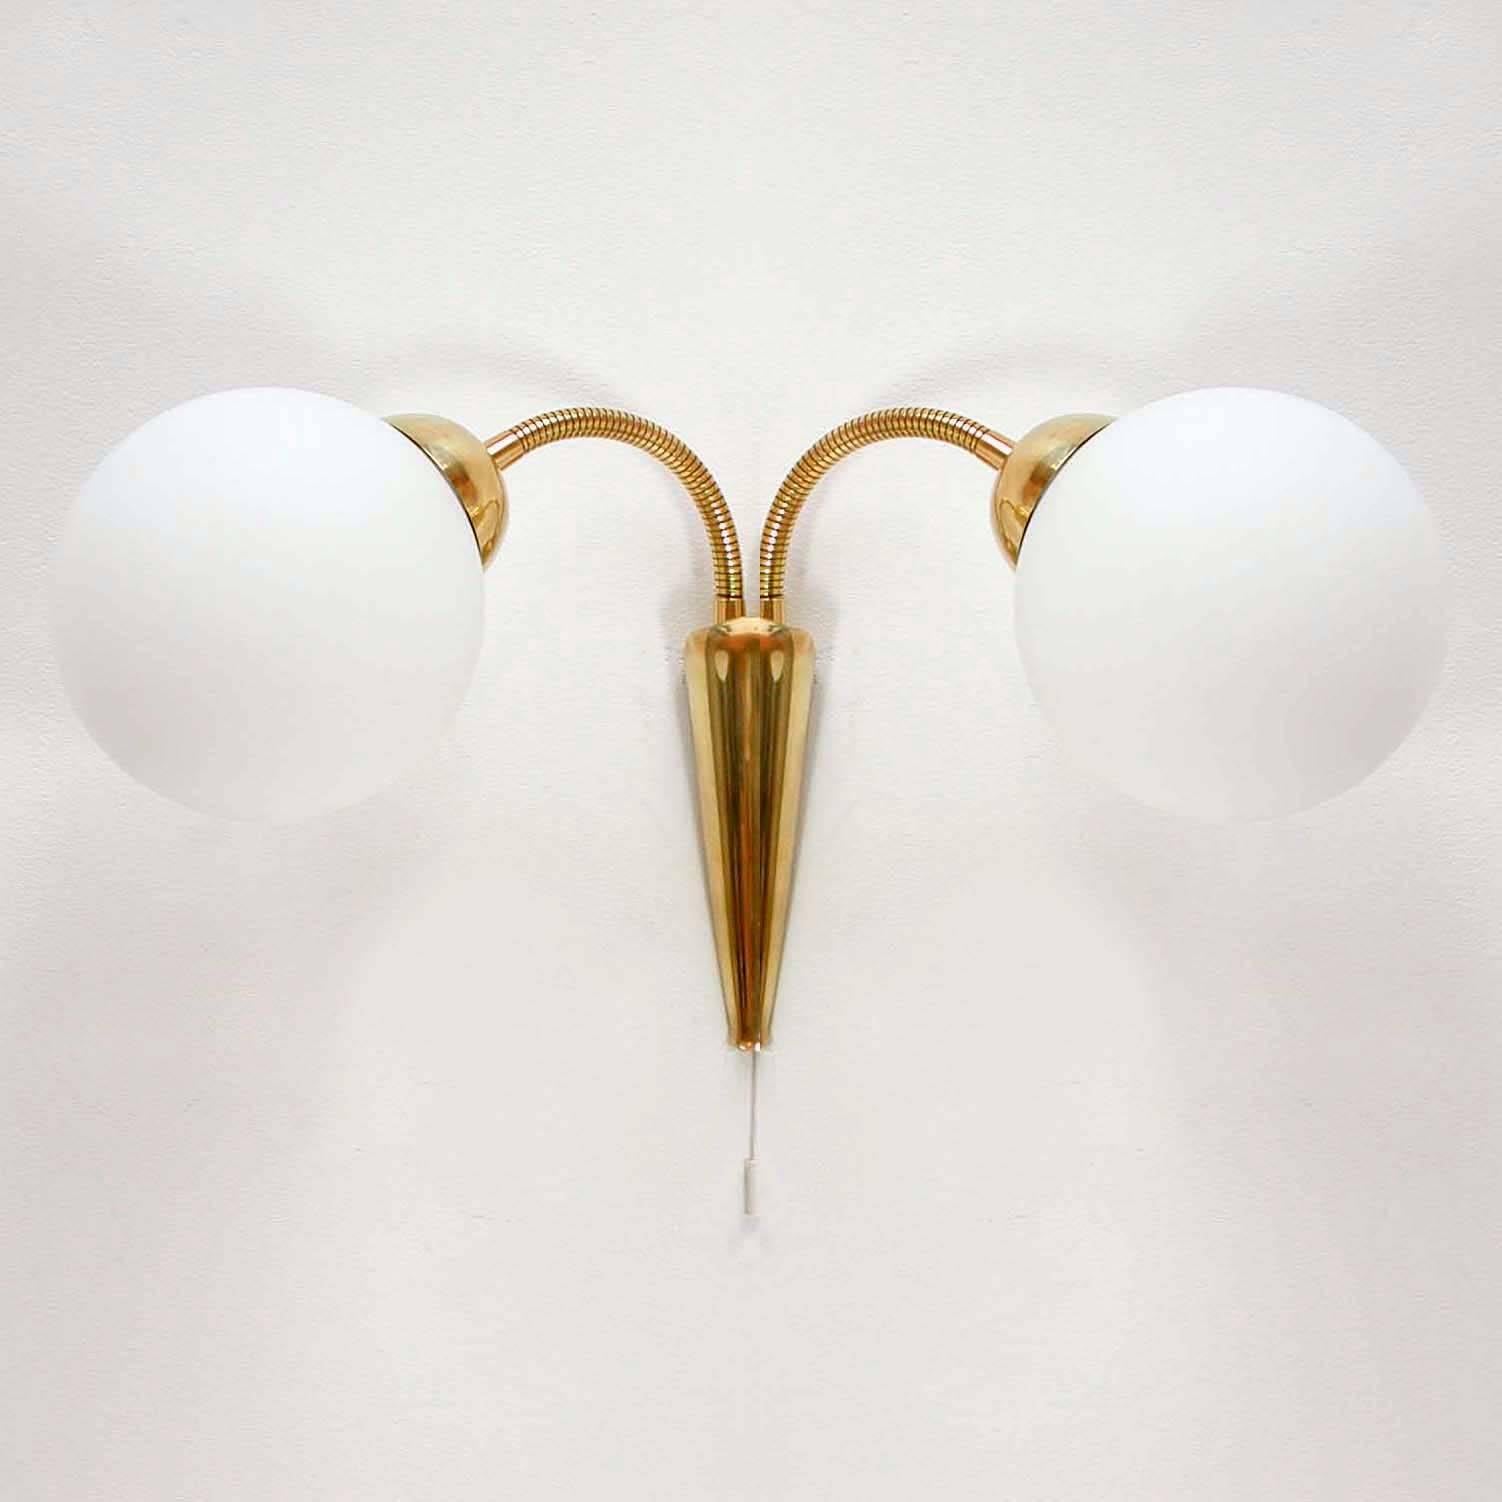 This vintage wall light was manufactured in Italy, in the late 1950s.
It has got double-gooseneck brass lamp arms and white opal glass lampshades.
The sconce has been rewired and is suitable for use in any country of the world.